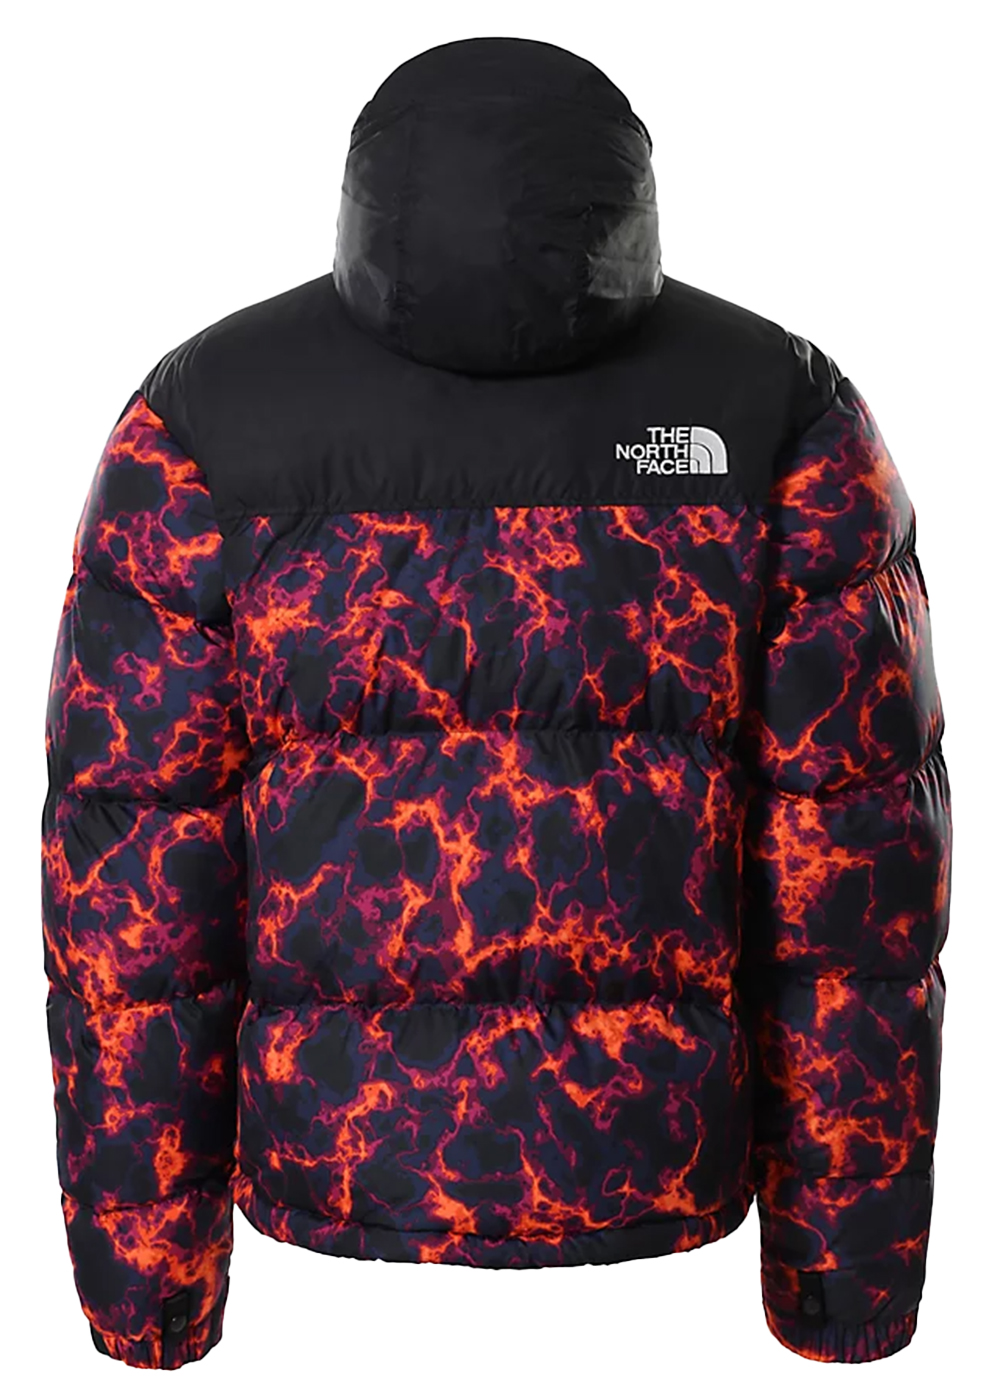 The North Face 1996 Printed Retro Nuptse 700 Fill Packable Jacket